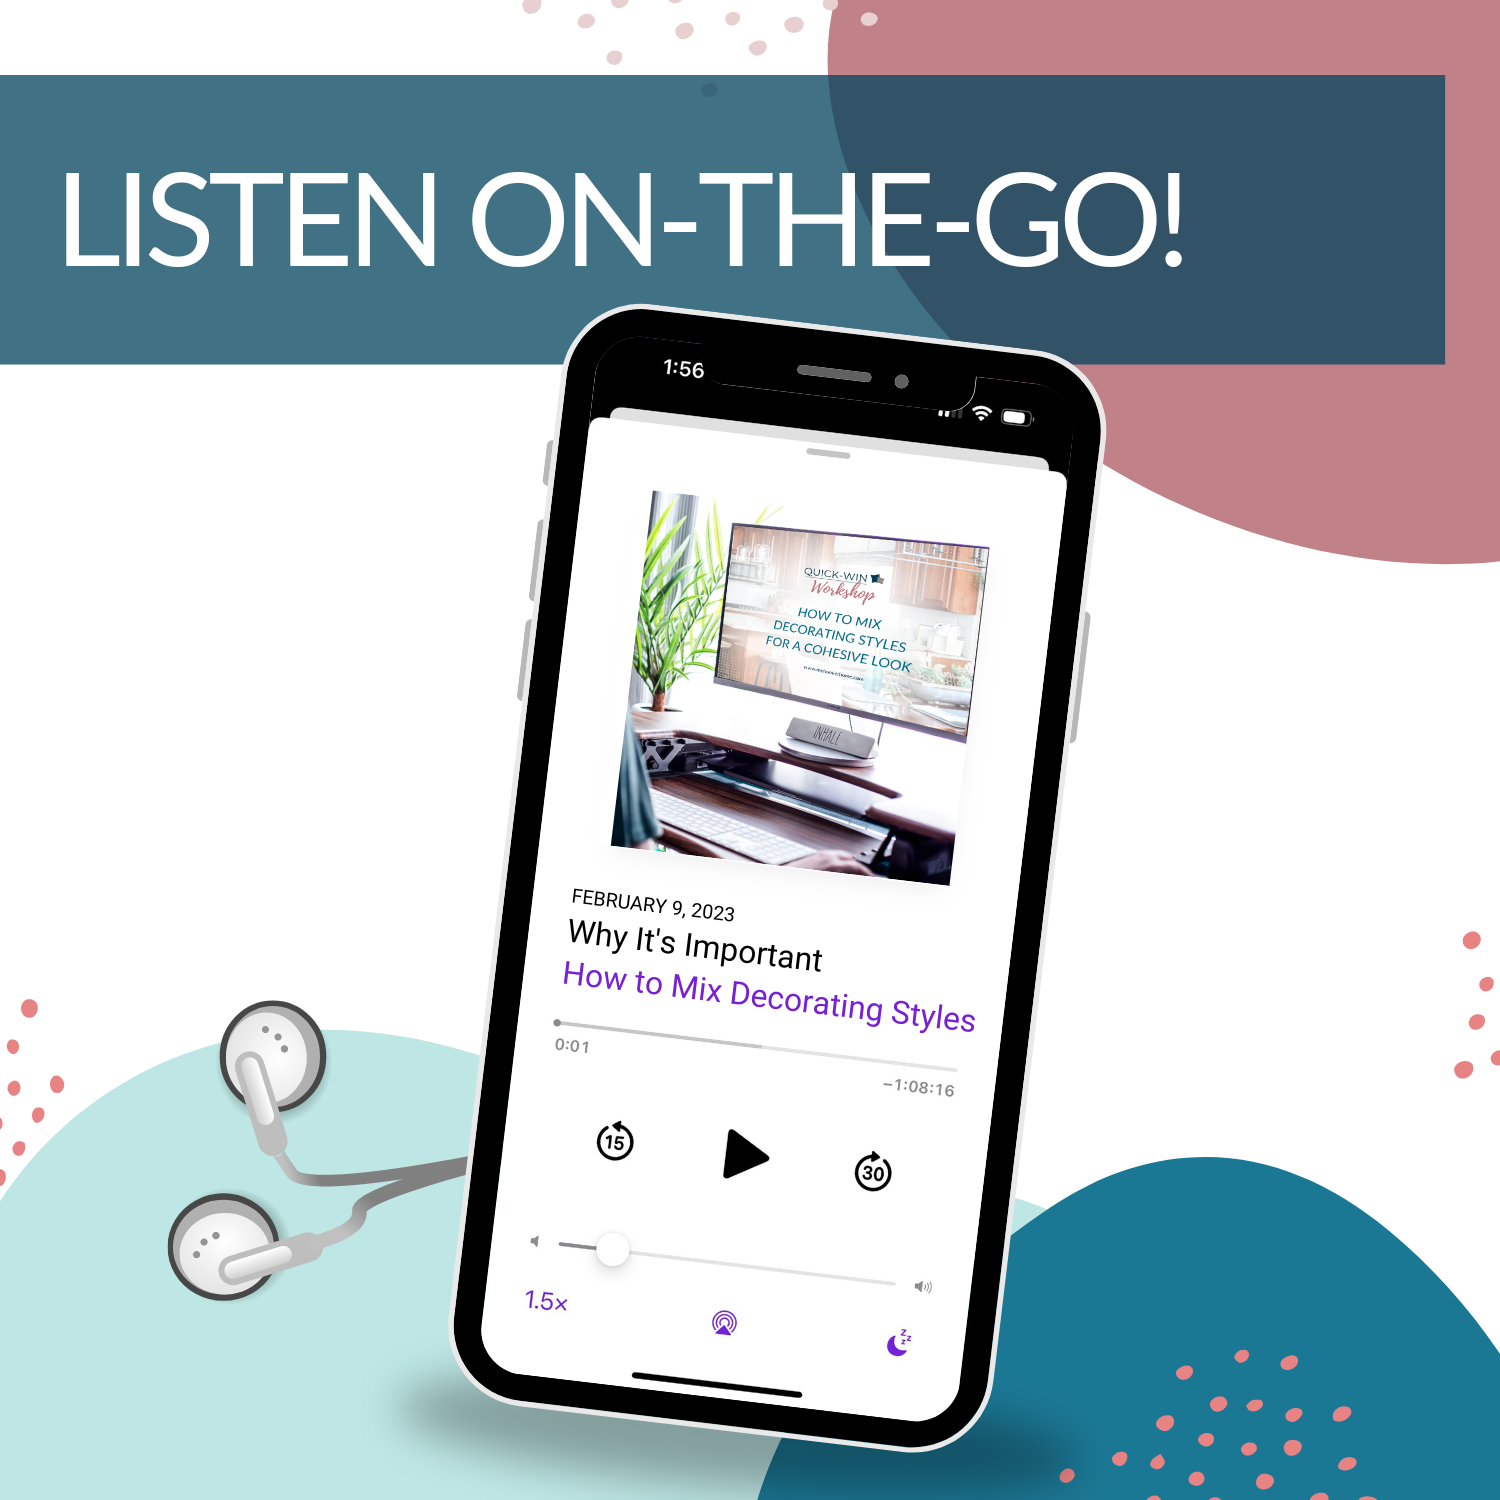 Listen to your favorite audio content on the go, without compromising your style preferences. Whether you are interested in home decorating or achieving cohesiveness in your busy life, My Homier Home&